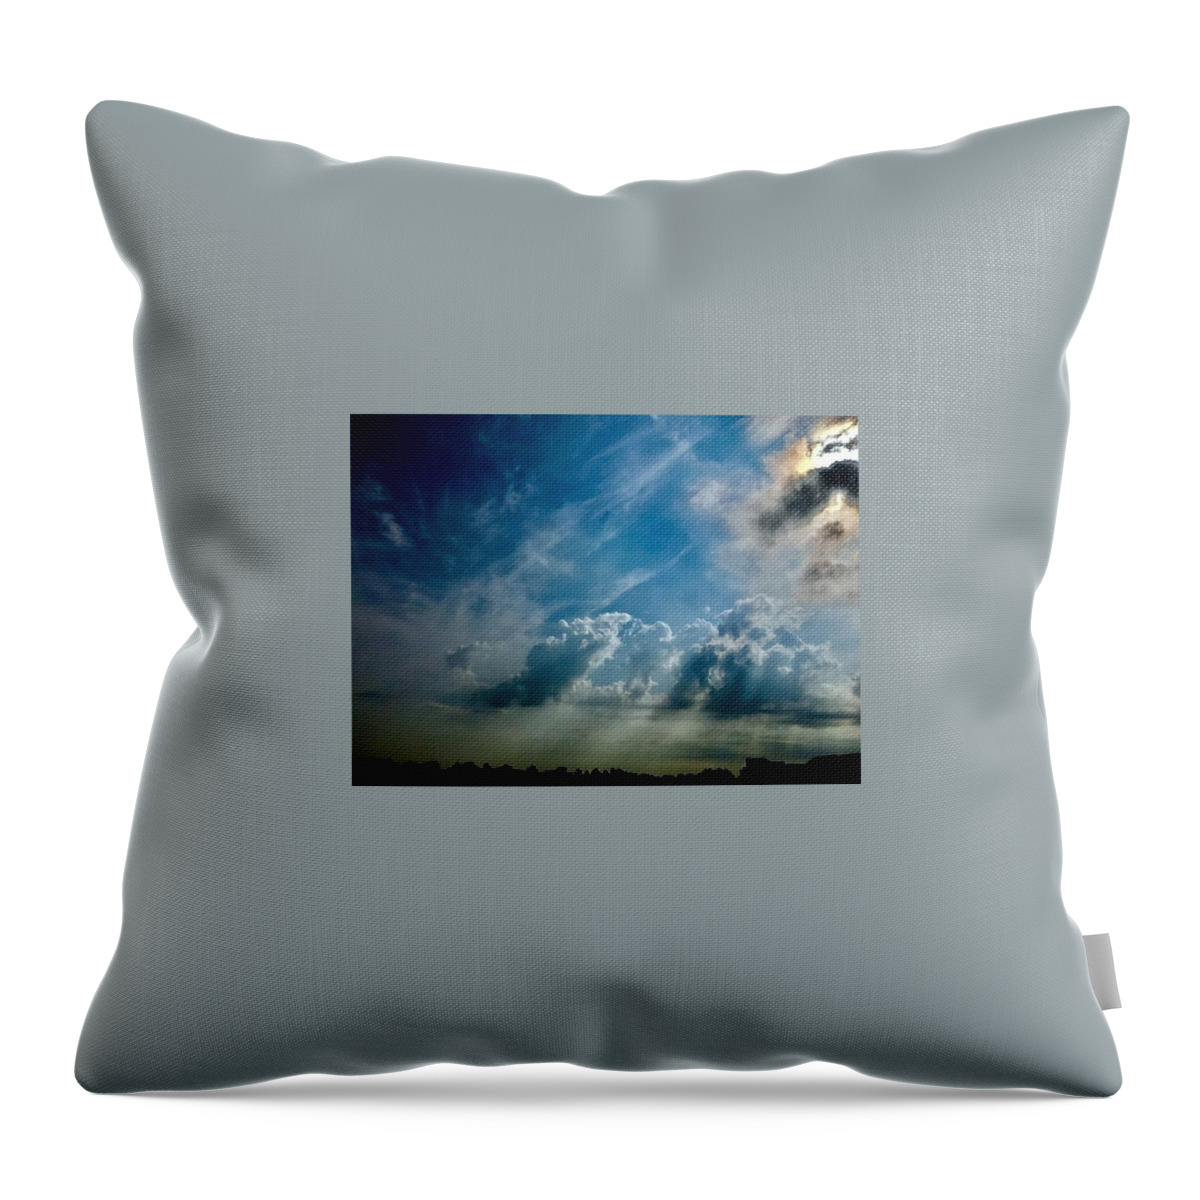 Sky Throw Pillow featuring the photograph The Man in the Clouds by Shawn M Greener